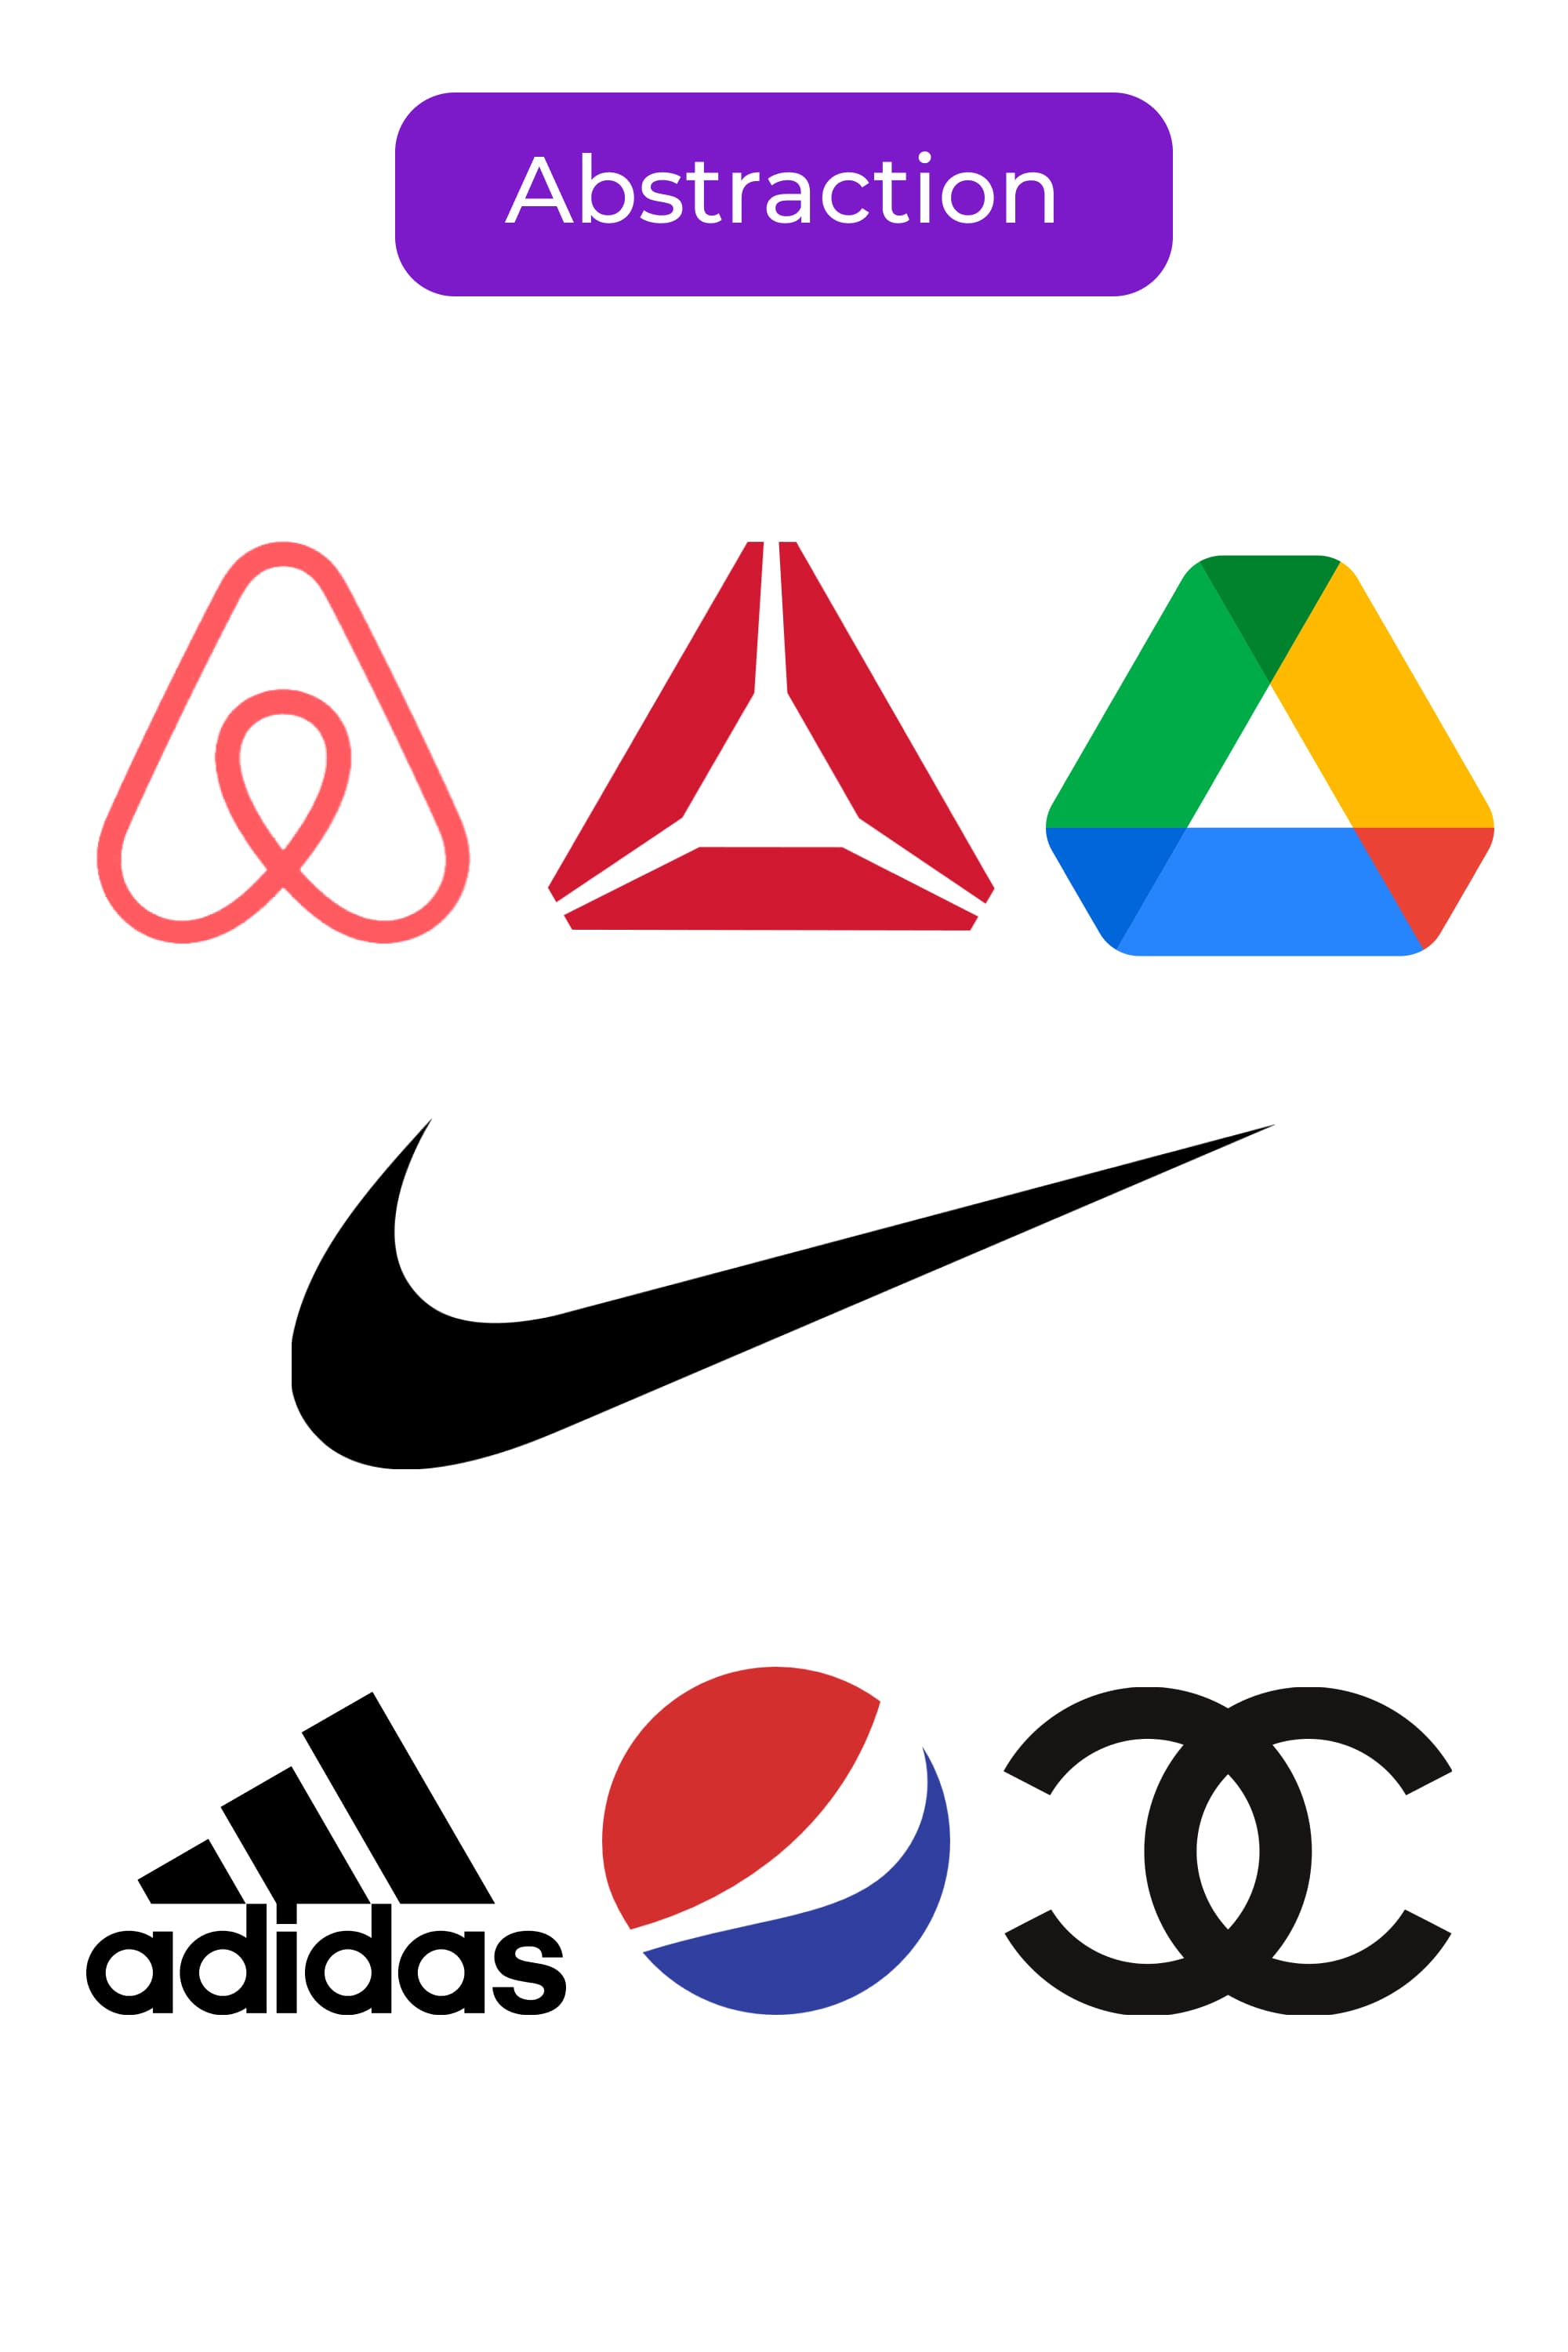 Collage of logos of famous brands in the form of abstract symbols.